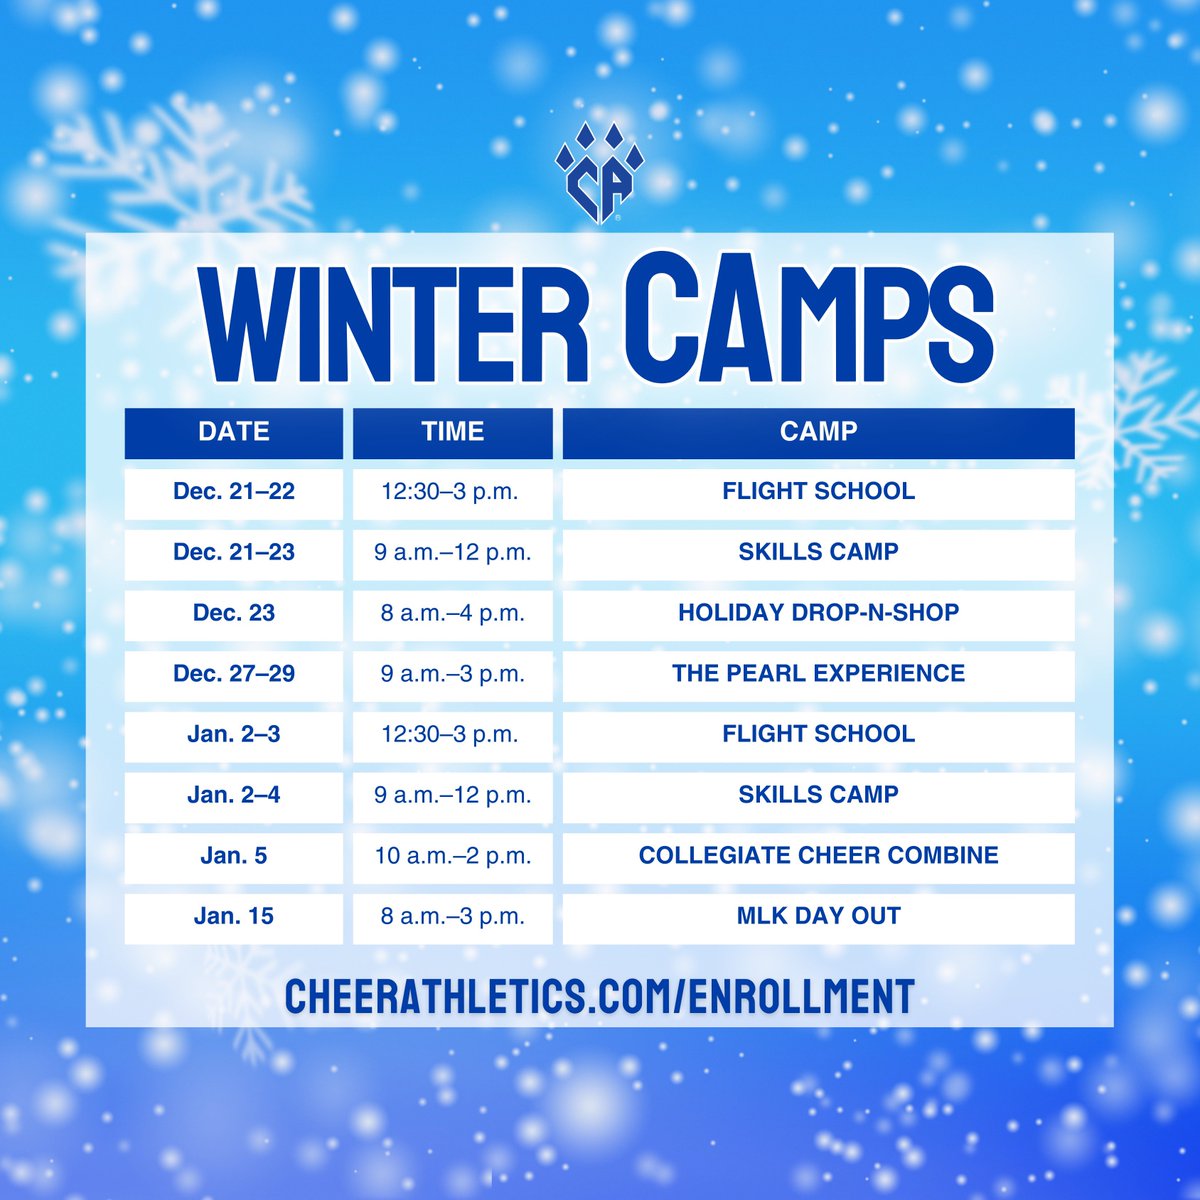 Calling all elves! Registration is OPEN for our Winter CAmps! We are offering half-day and full-day workshops so athletes can stay on top of their skills over the break and have FUN doing it! Register here app.iclasspro.com/portal/cheerat…